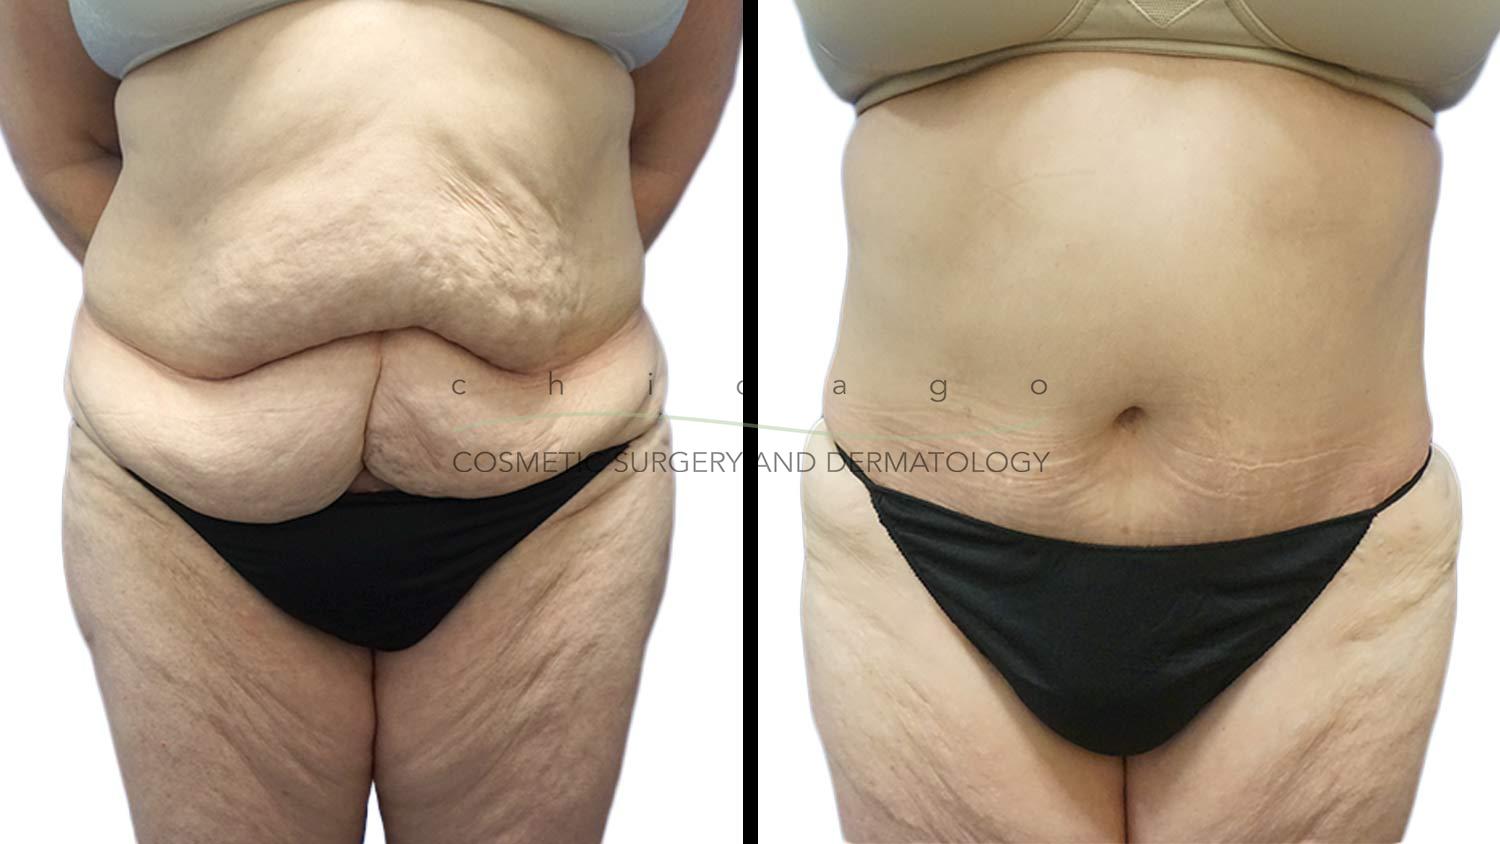 Body contouring after massive weightloss by Dr. Niki Christopoulos